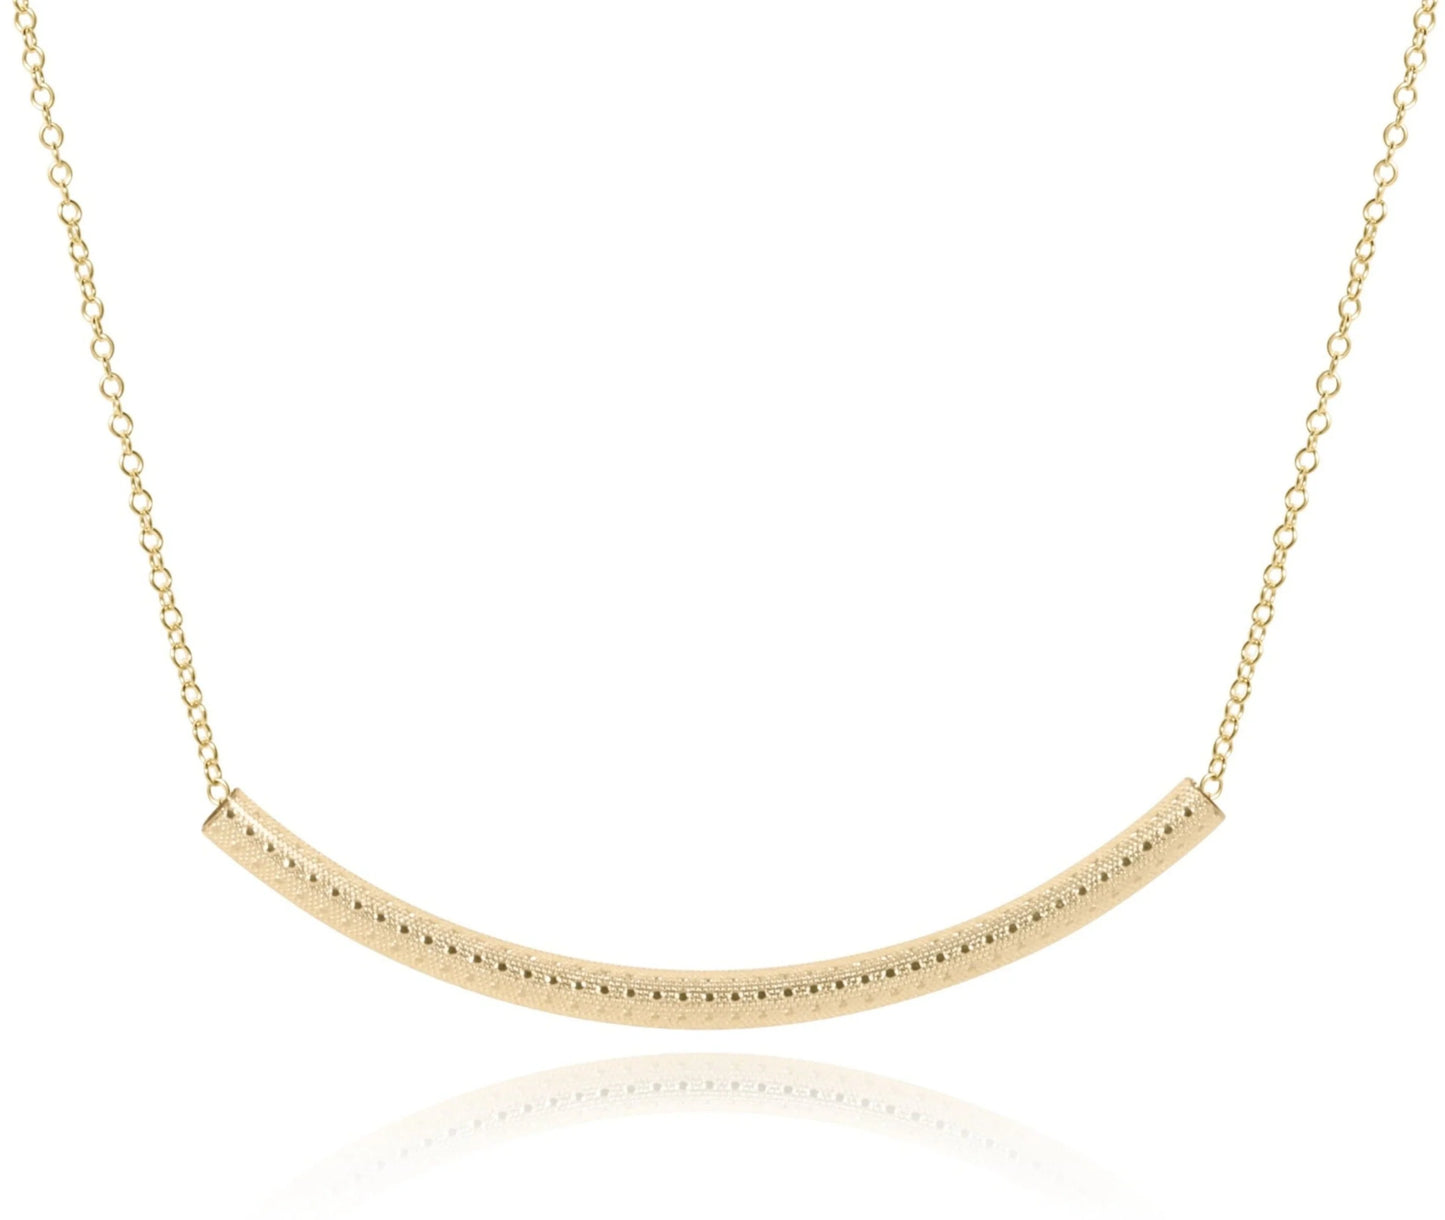 16” Necklace Gold - Bliss Bar Textured Gold